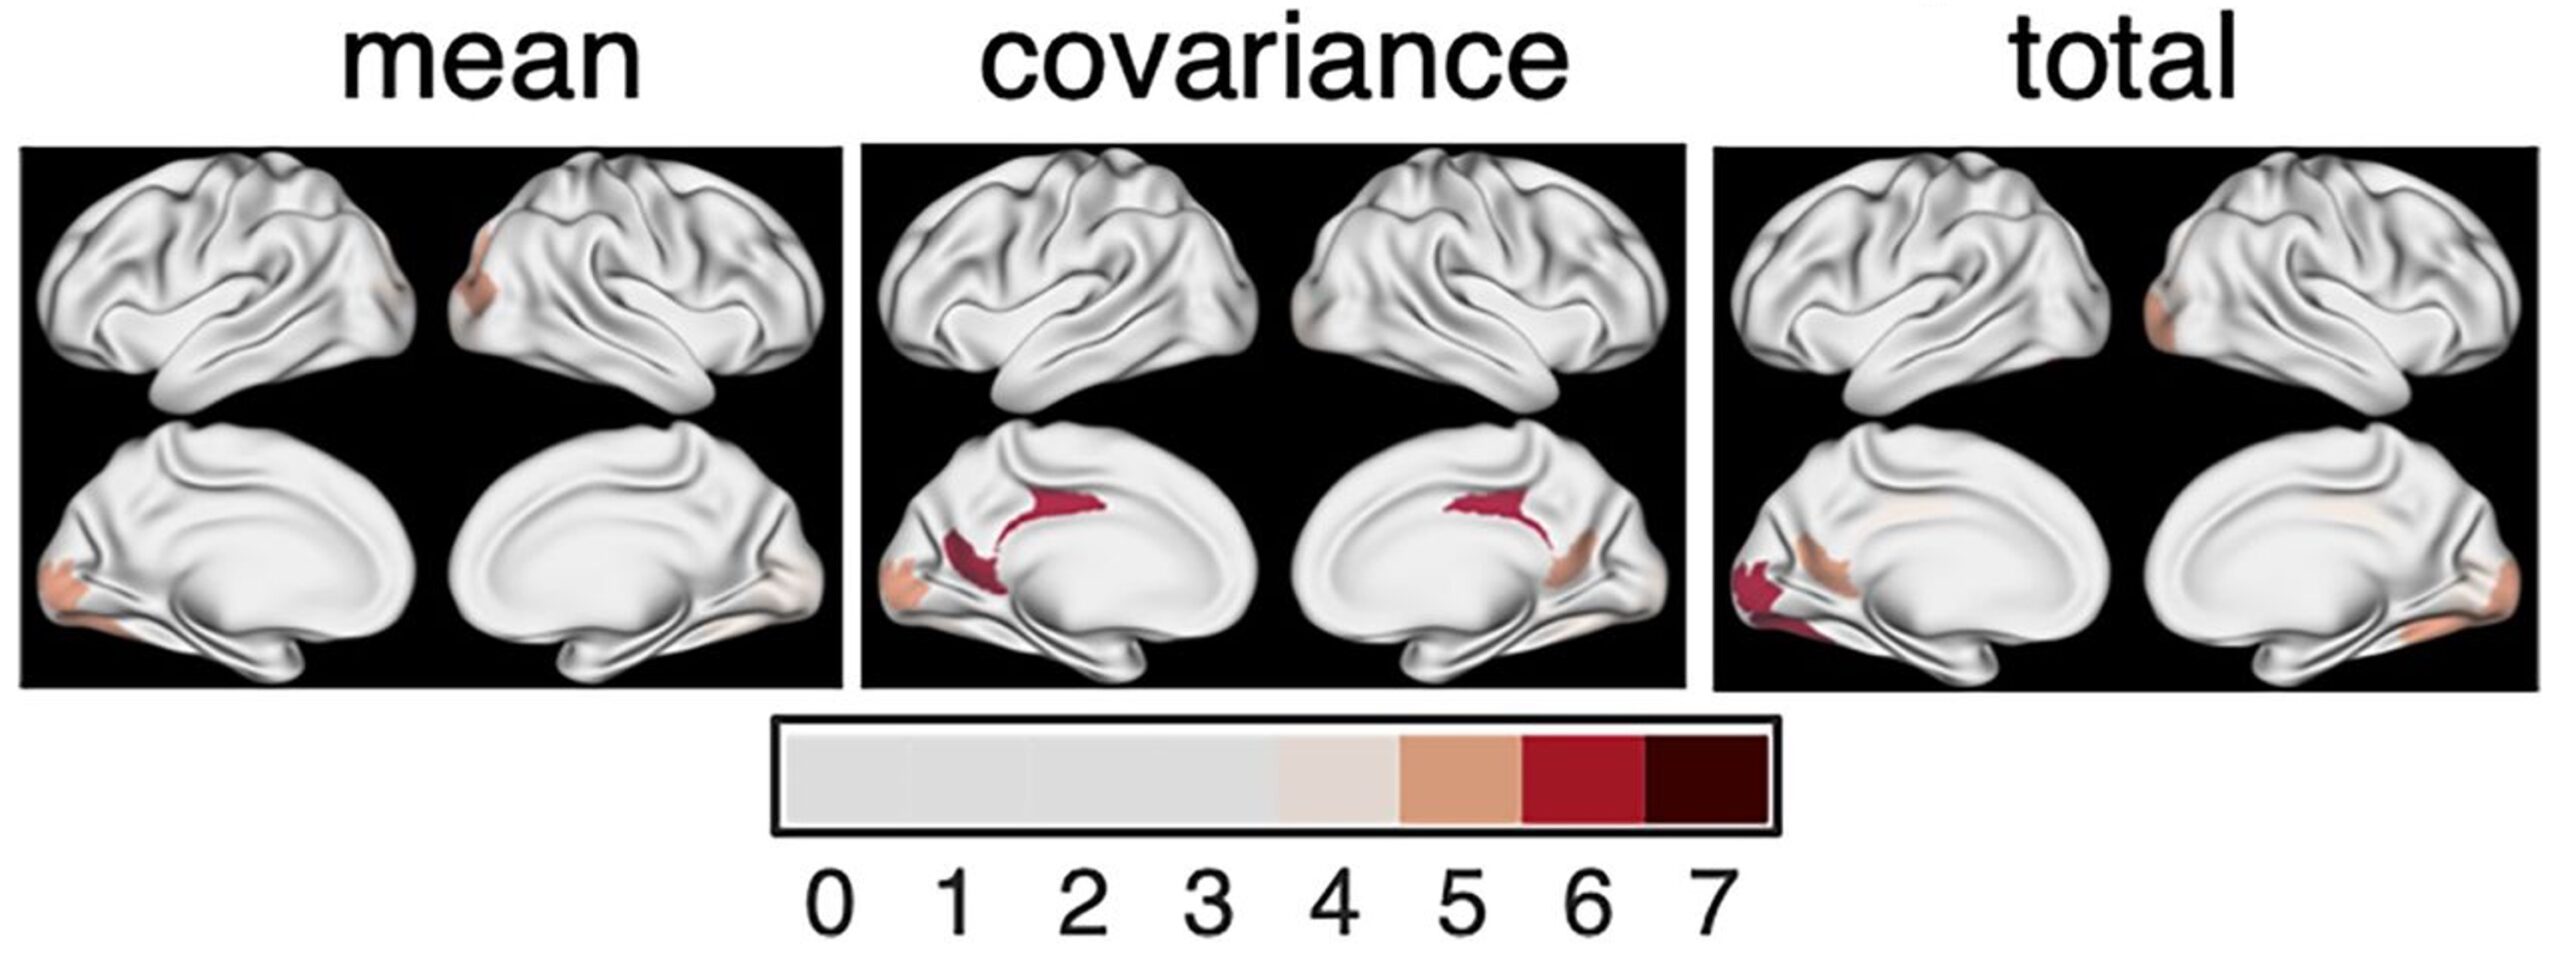 Brain regions important for controlling state transitions from resting state to cognitive tasks